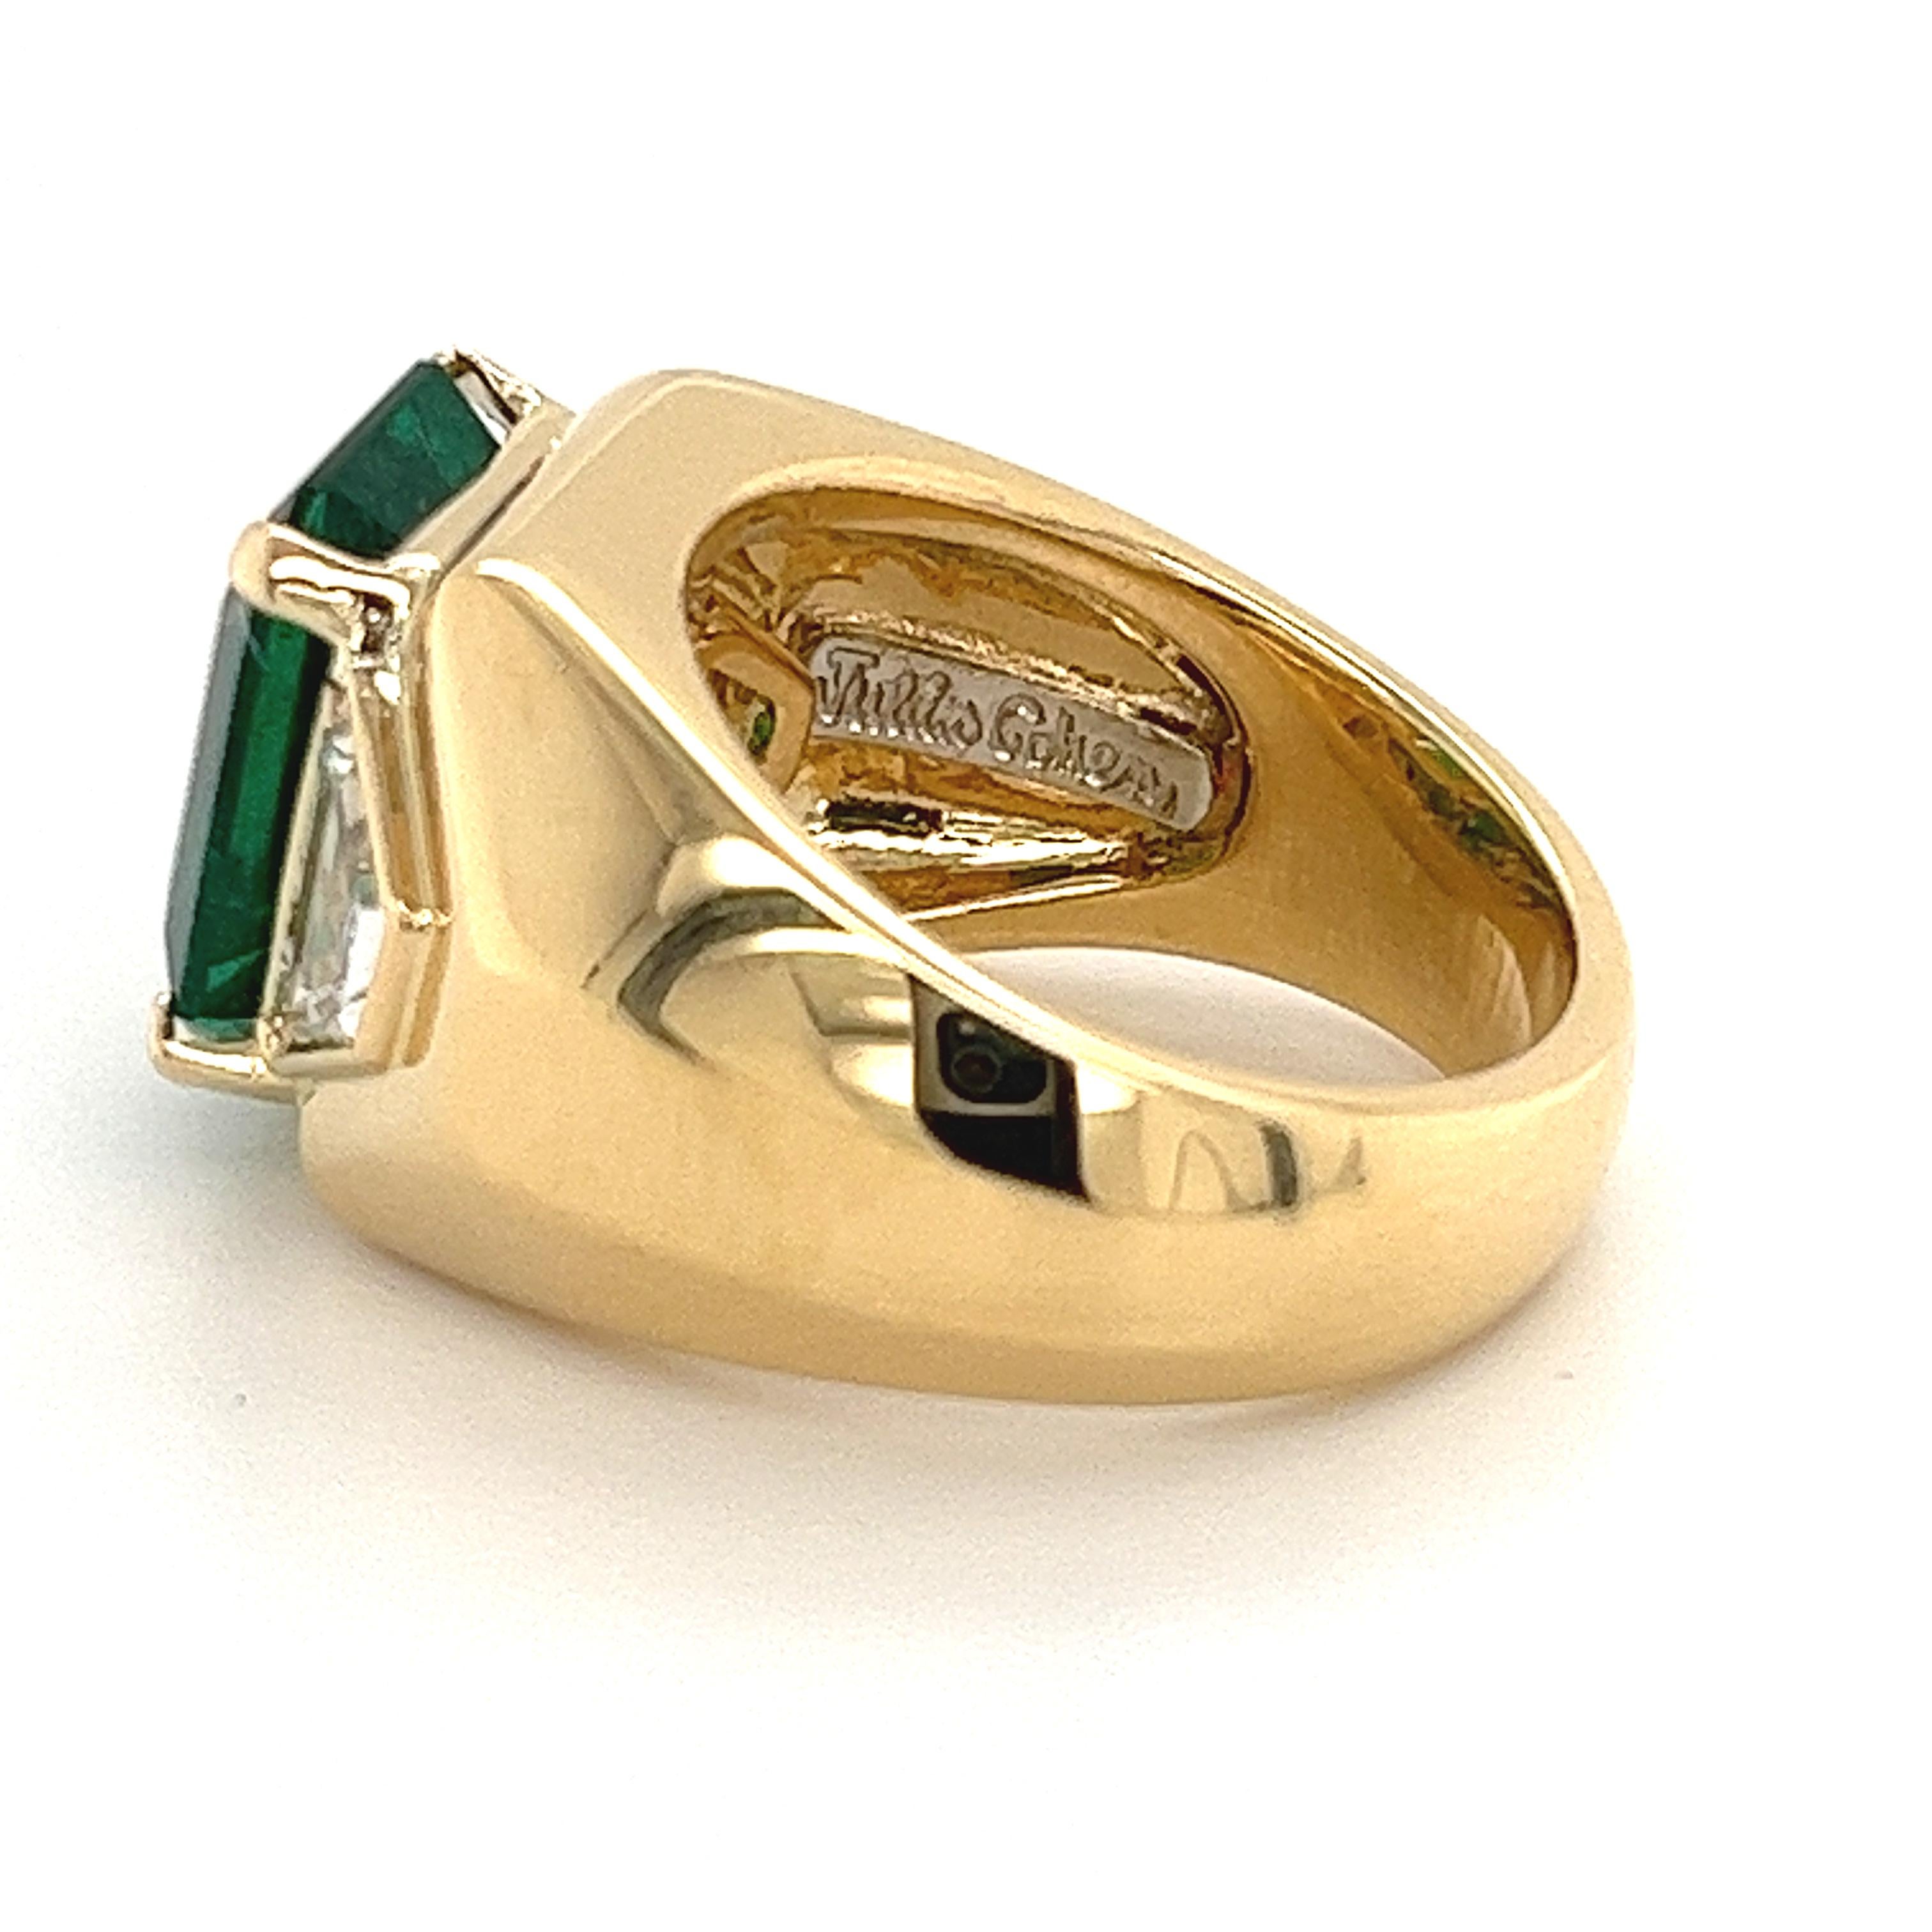 Introducing this Julius Cohen signed ring with a minor oil Zambian Emerald and 1 carat total in trapezoid cut diamond side stones set in an 18k yellow gold ring. AGL certified with treatment and origin report. 

This 5.40-carat vibrant emerald bears